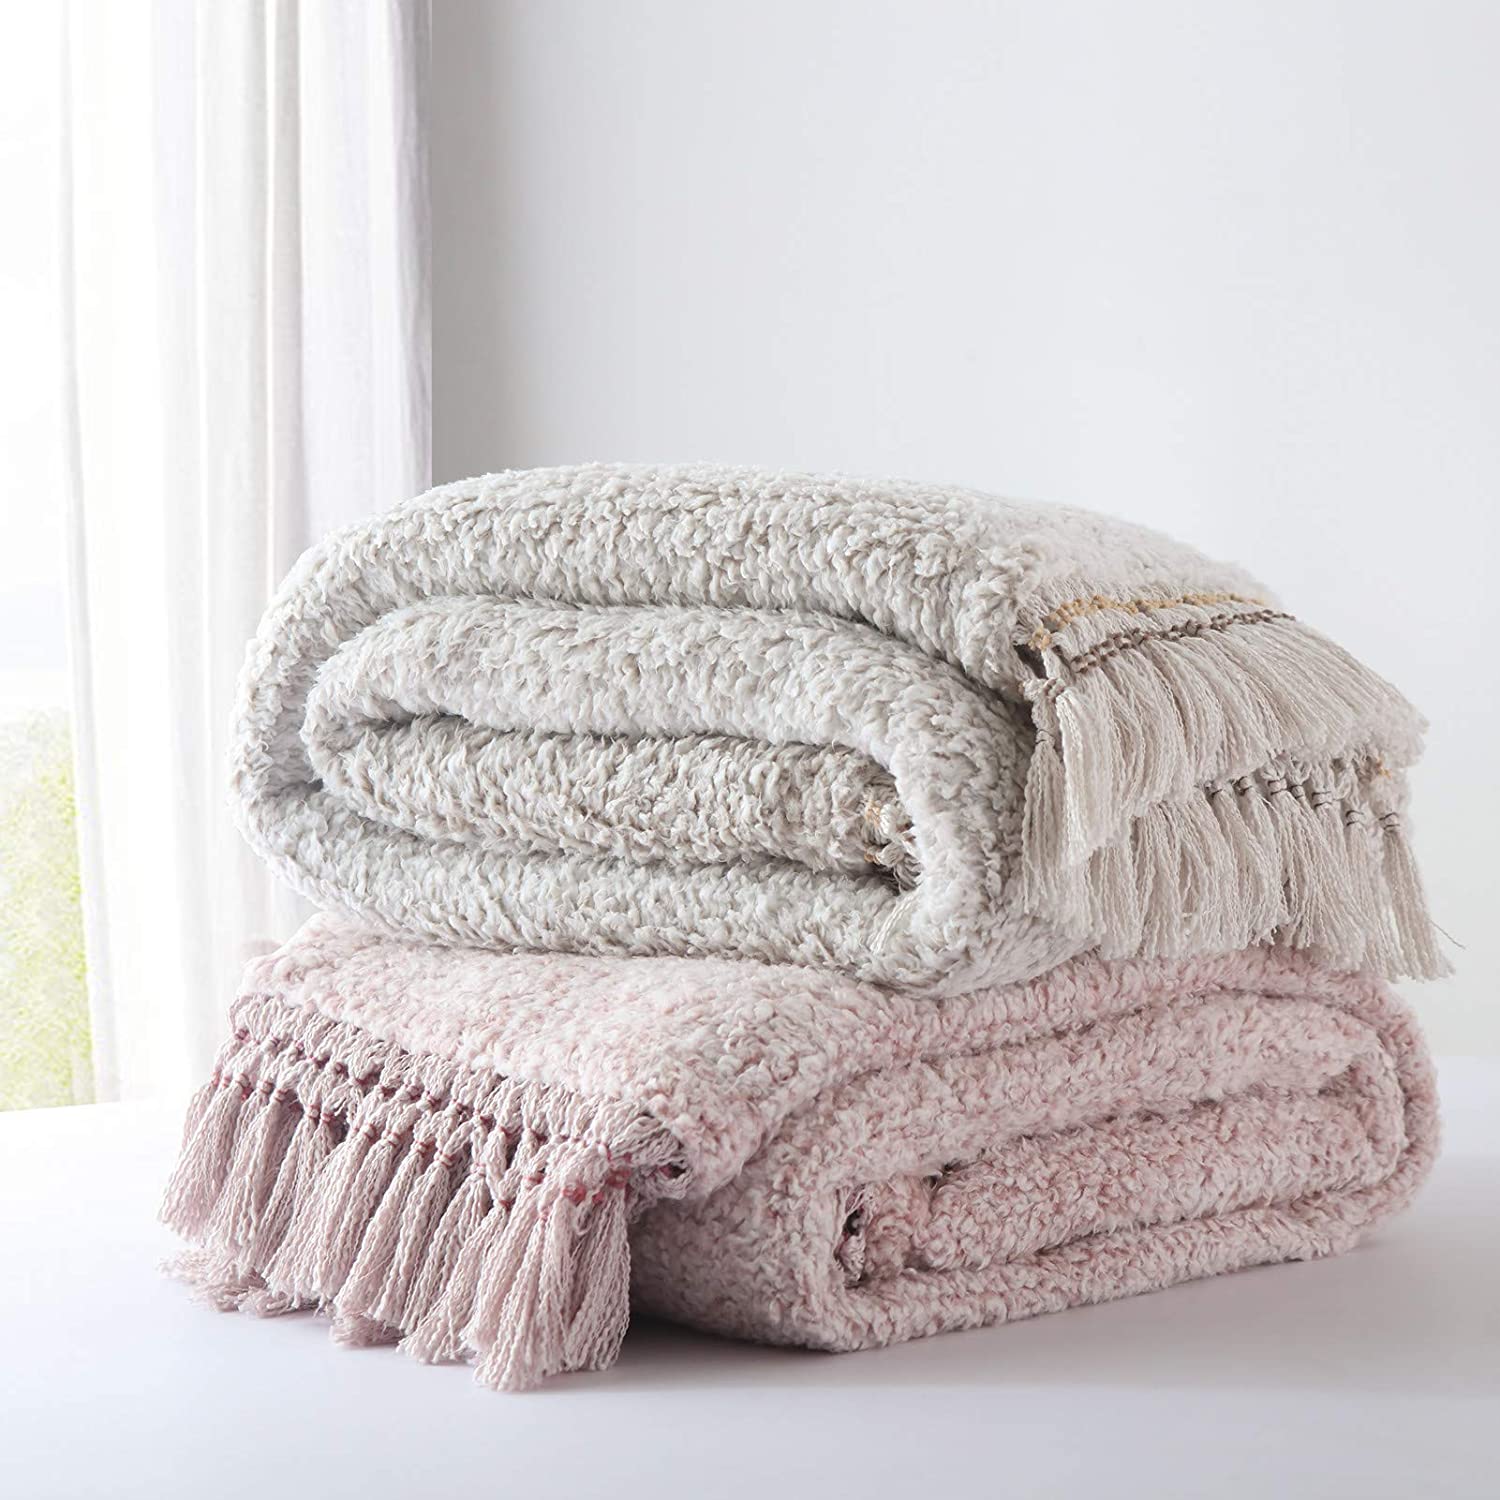 16 Perfect Mother's Day Gift Ideas blankets